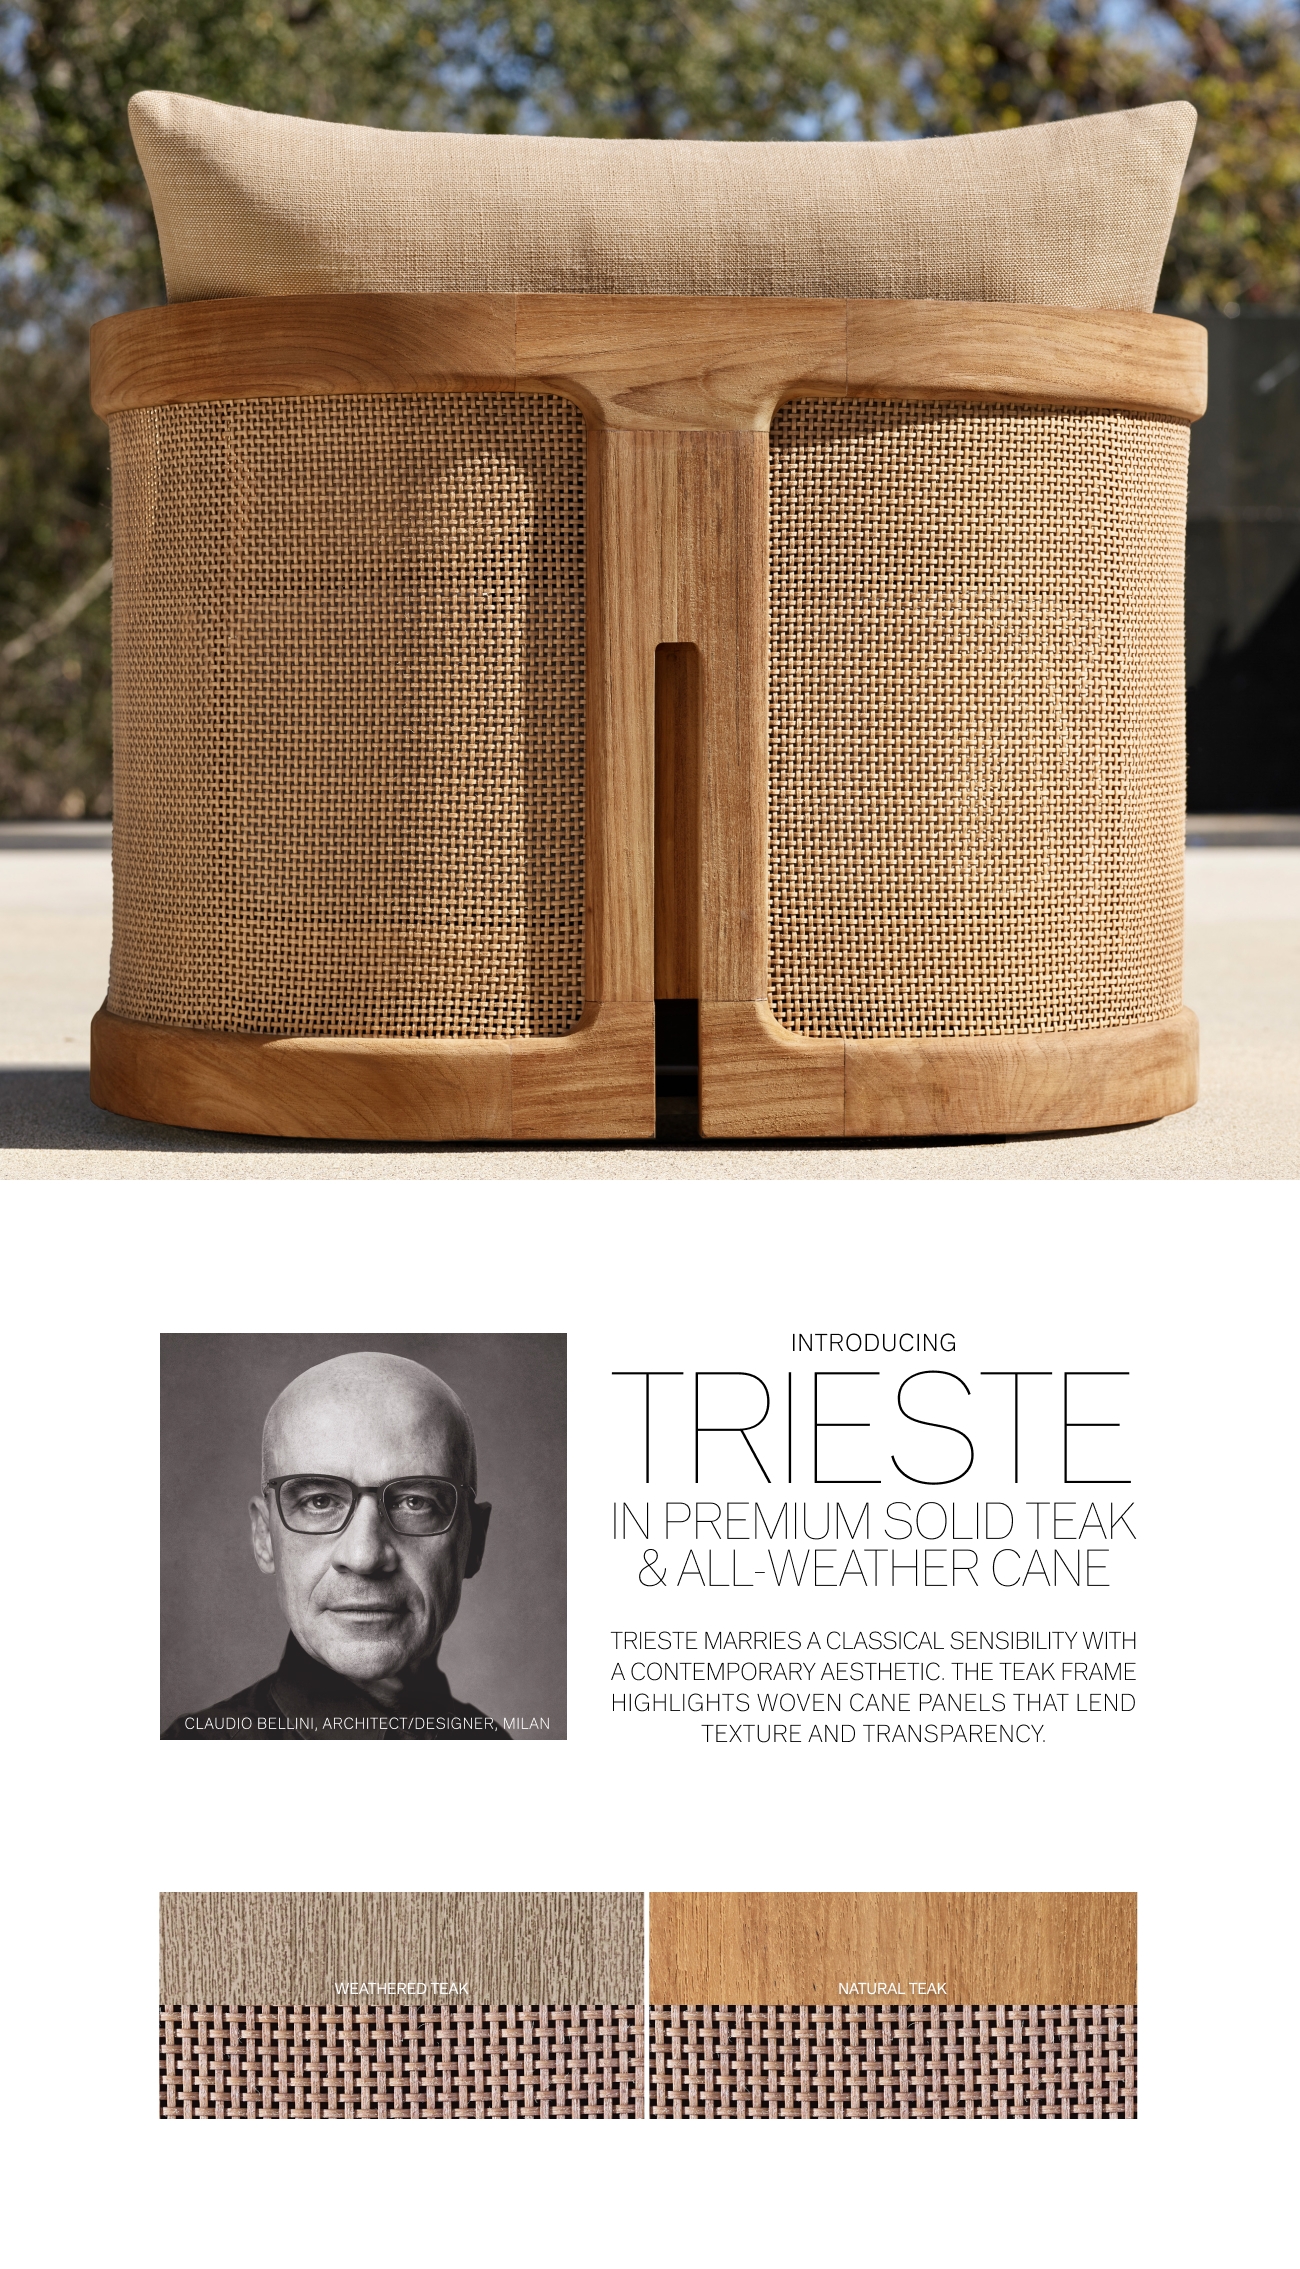  g Gt i INTRODUCING IRIESTE REMIUM SOLID T ALL-WEATHER CA TRIESTE MARRIES A CLASSICAL SENSIBILITY WITH A CONTEMPORARY AESTHETIC. THE TEAK FRAME HIGHLIGHTS WOVEN CANE PANELS THAT LEND TEXTURE AND TRANSPARENCY. DIO BELLINI, ARCHITECTDESIGNER, WILAN 